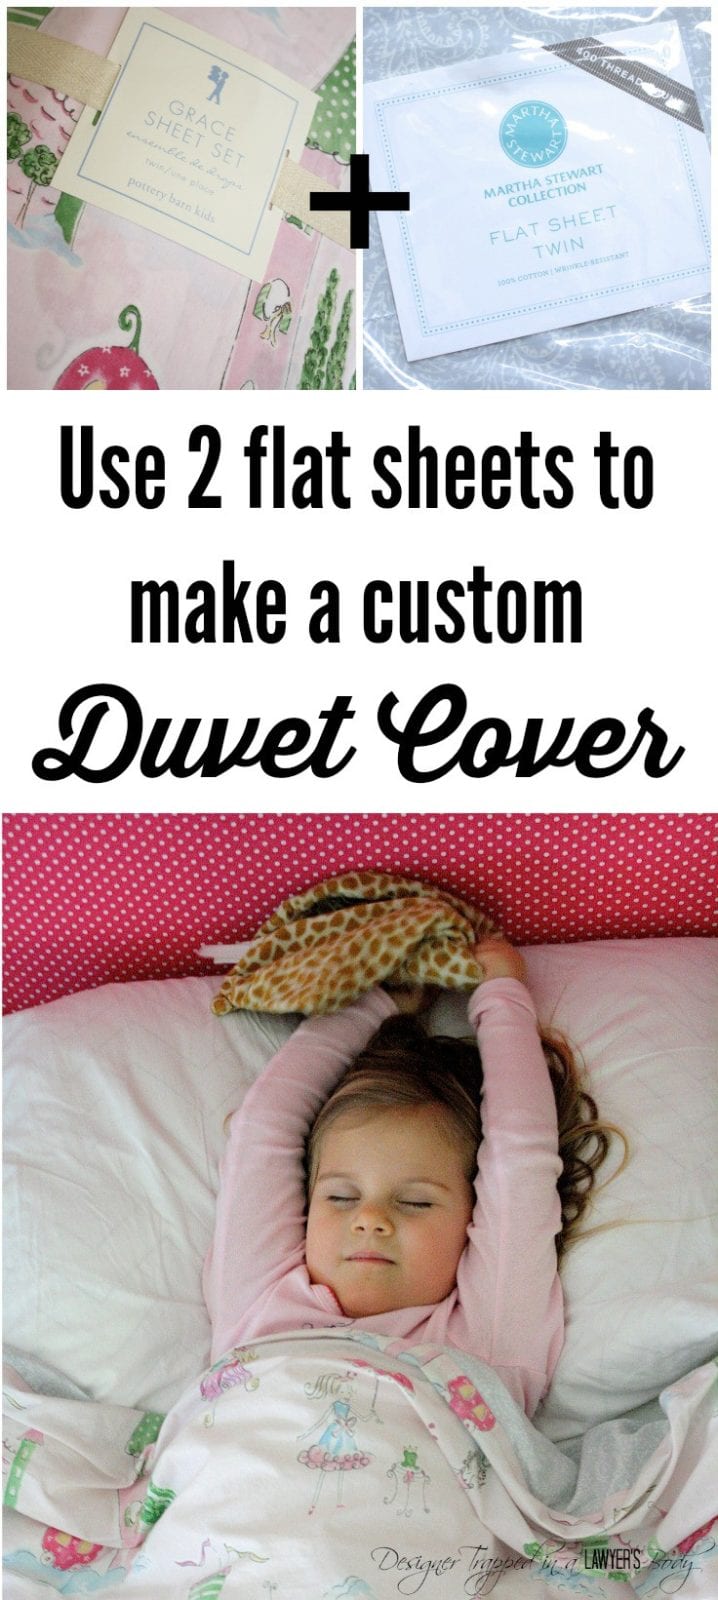 THIS IS BRILLIANT! Learn to make a DIY duvet cover using 2 flat sheets. It's so easy with this tutorial from Designer Trapped in a Lawyer's Body.